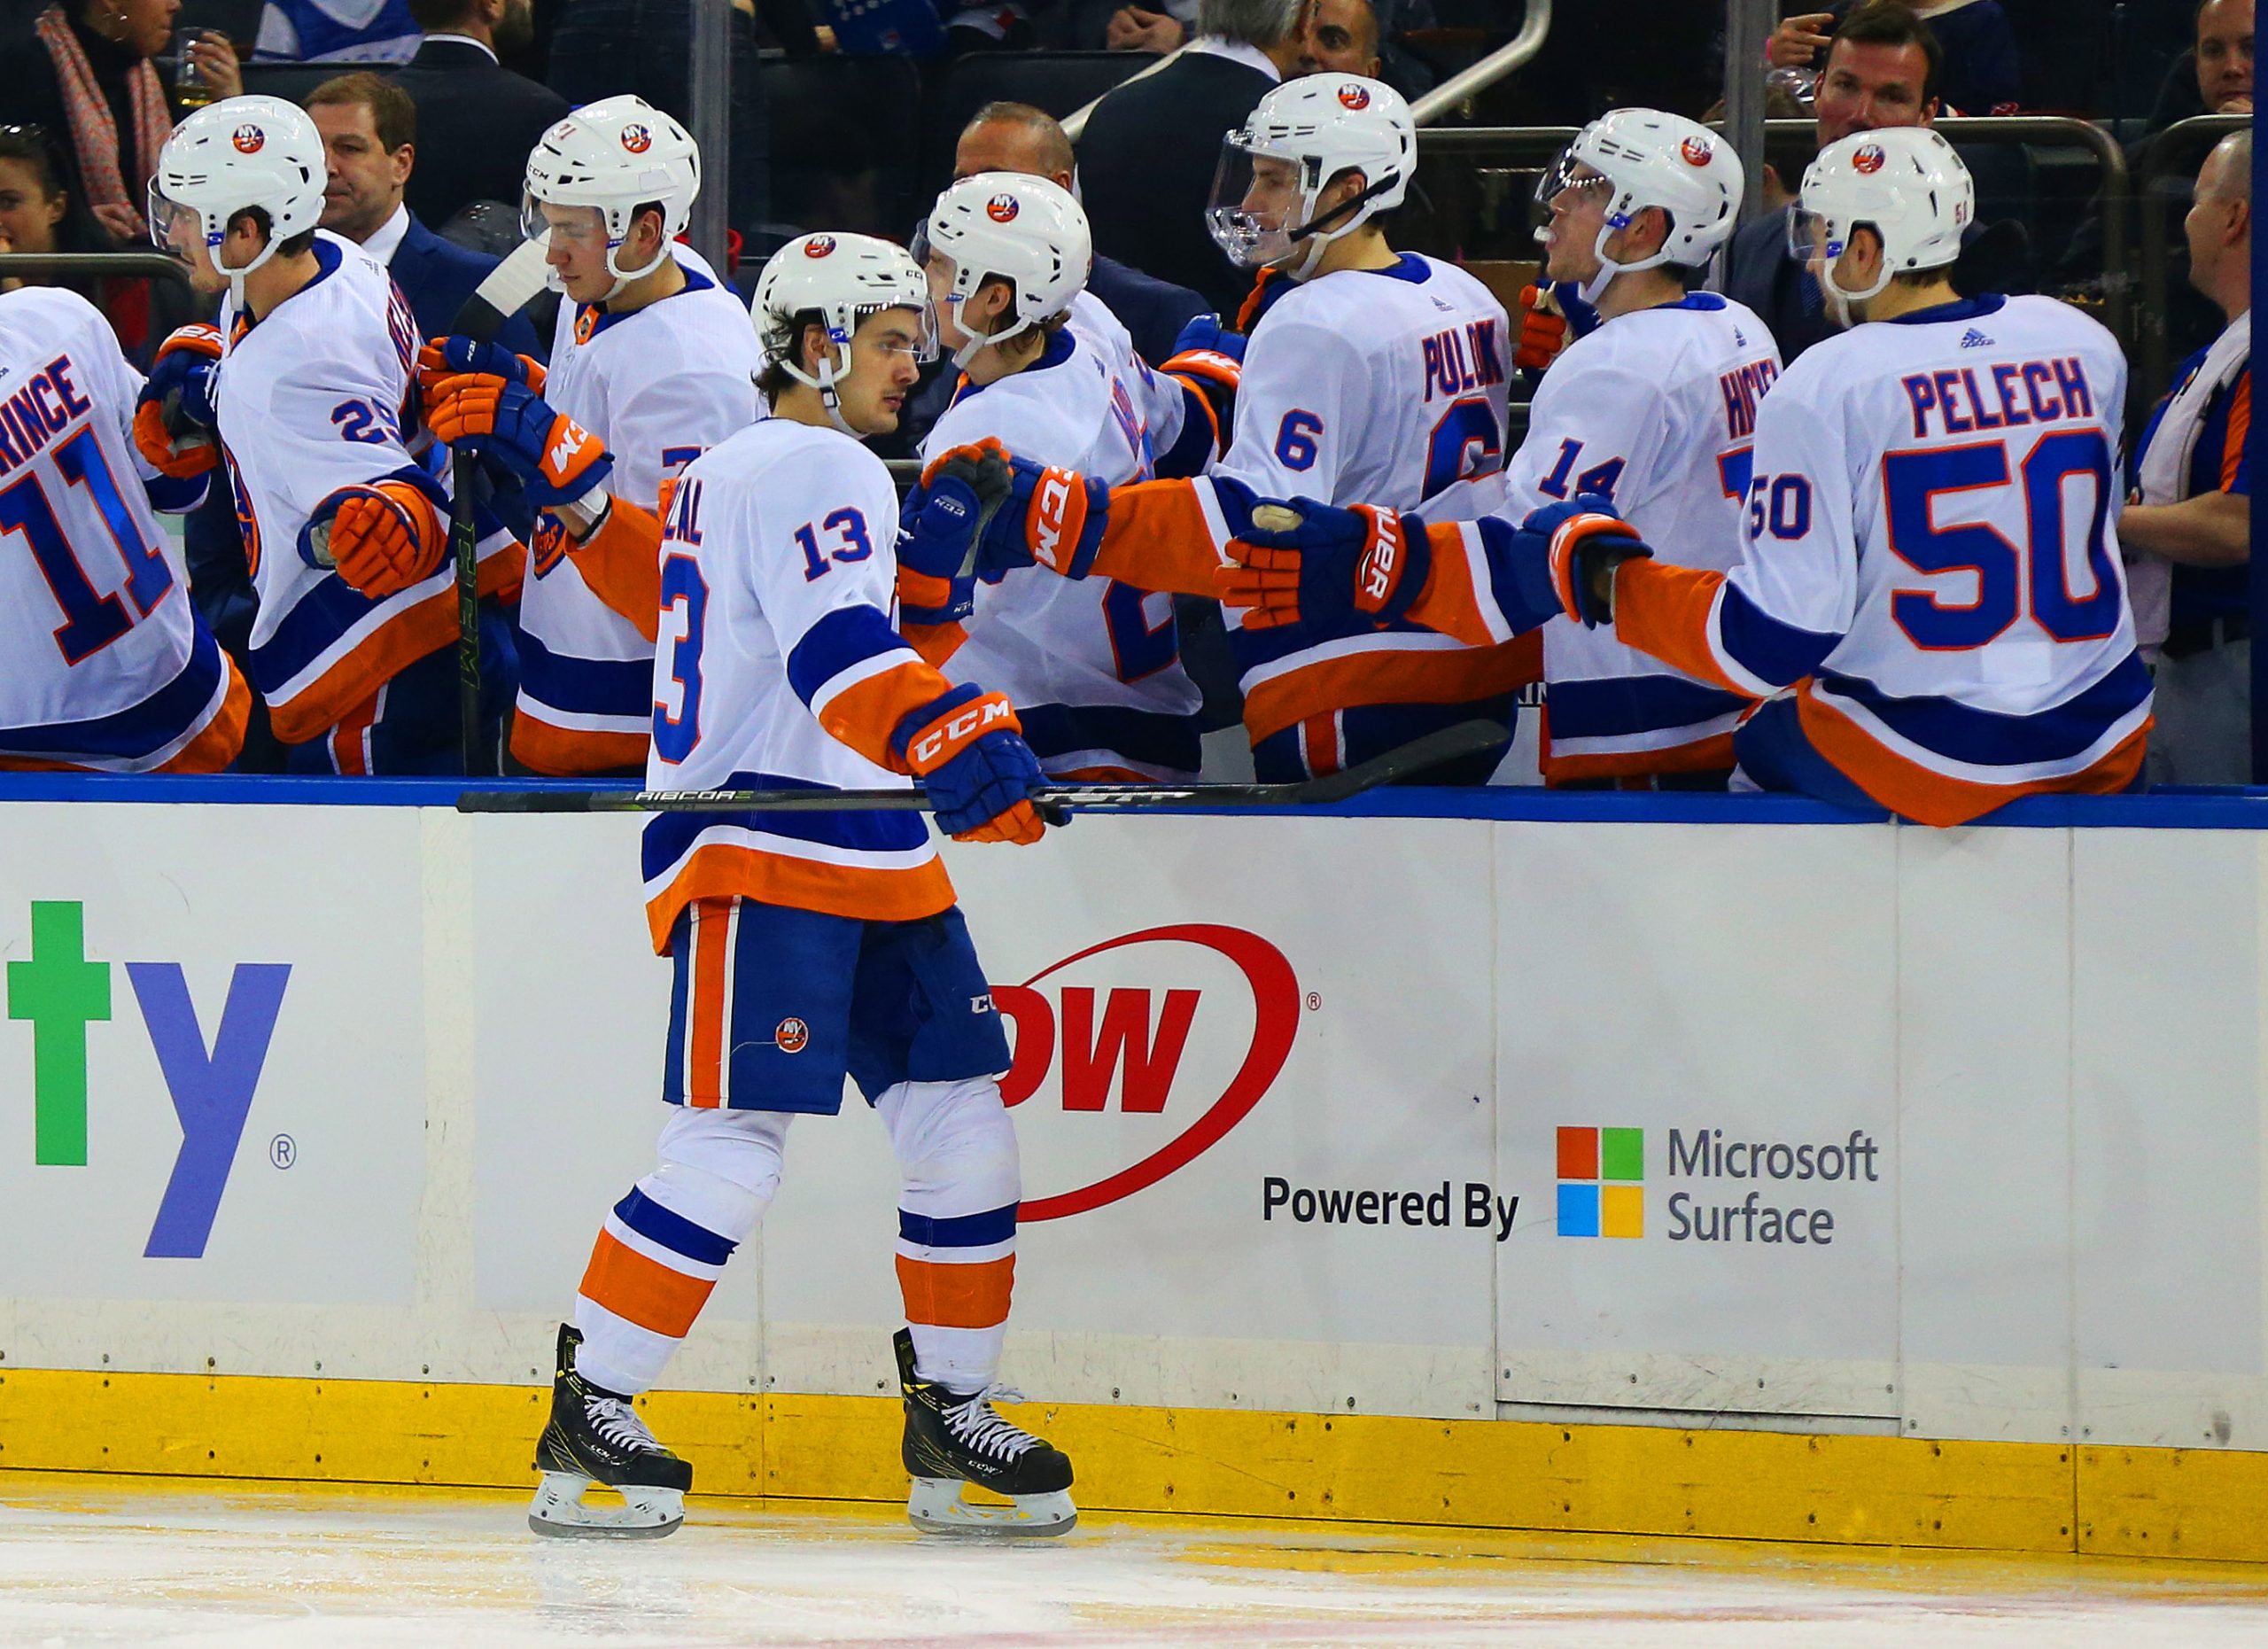 Jan 13, 2018; New York, NY, USA; New York Islanders center Mathew Barzal (13) is congratulated after scoring a goal against the New York Rangers during the second period at Madison Square Garden. Mandatory Credit: Andy Marlin-USA TODAY Sports